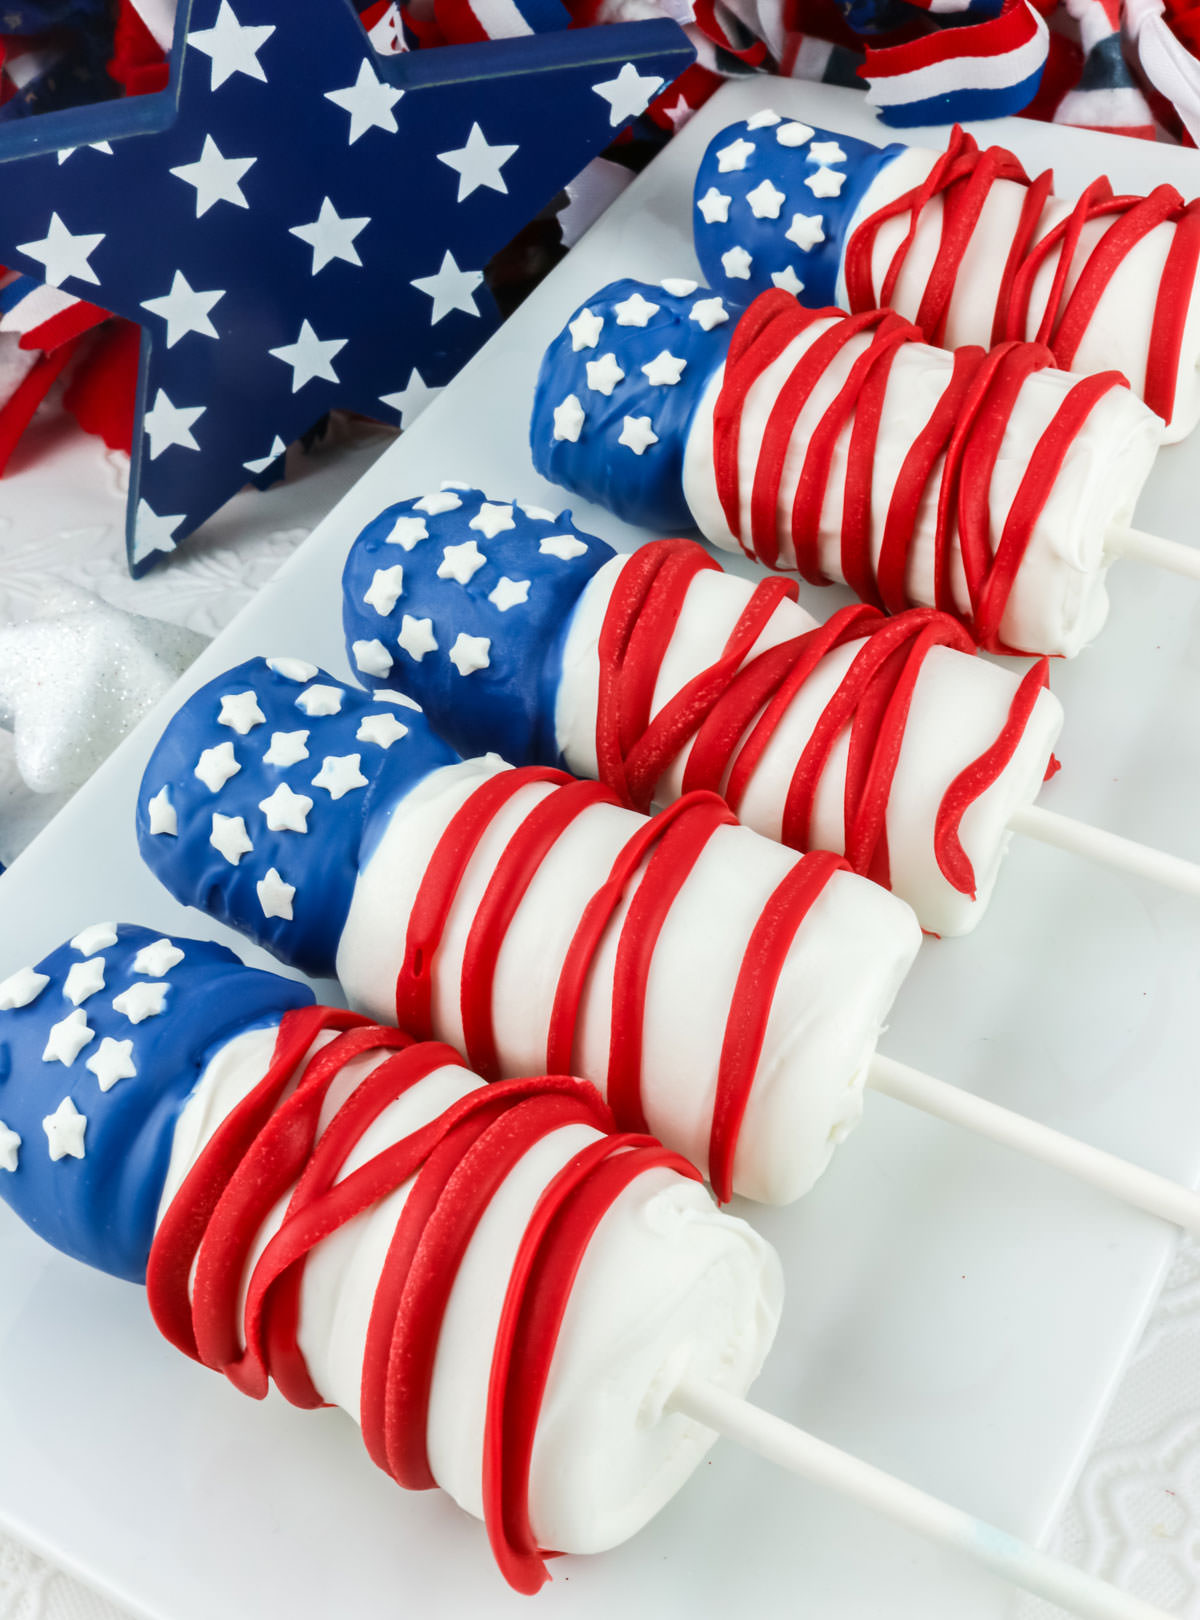 Five red white and blue American Flag Marshmallow Pops laying on a white serving platter on a white table in front of 4th of July decorations.